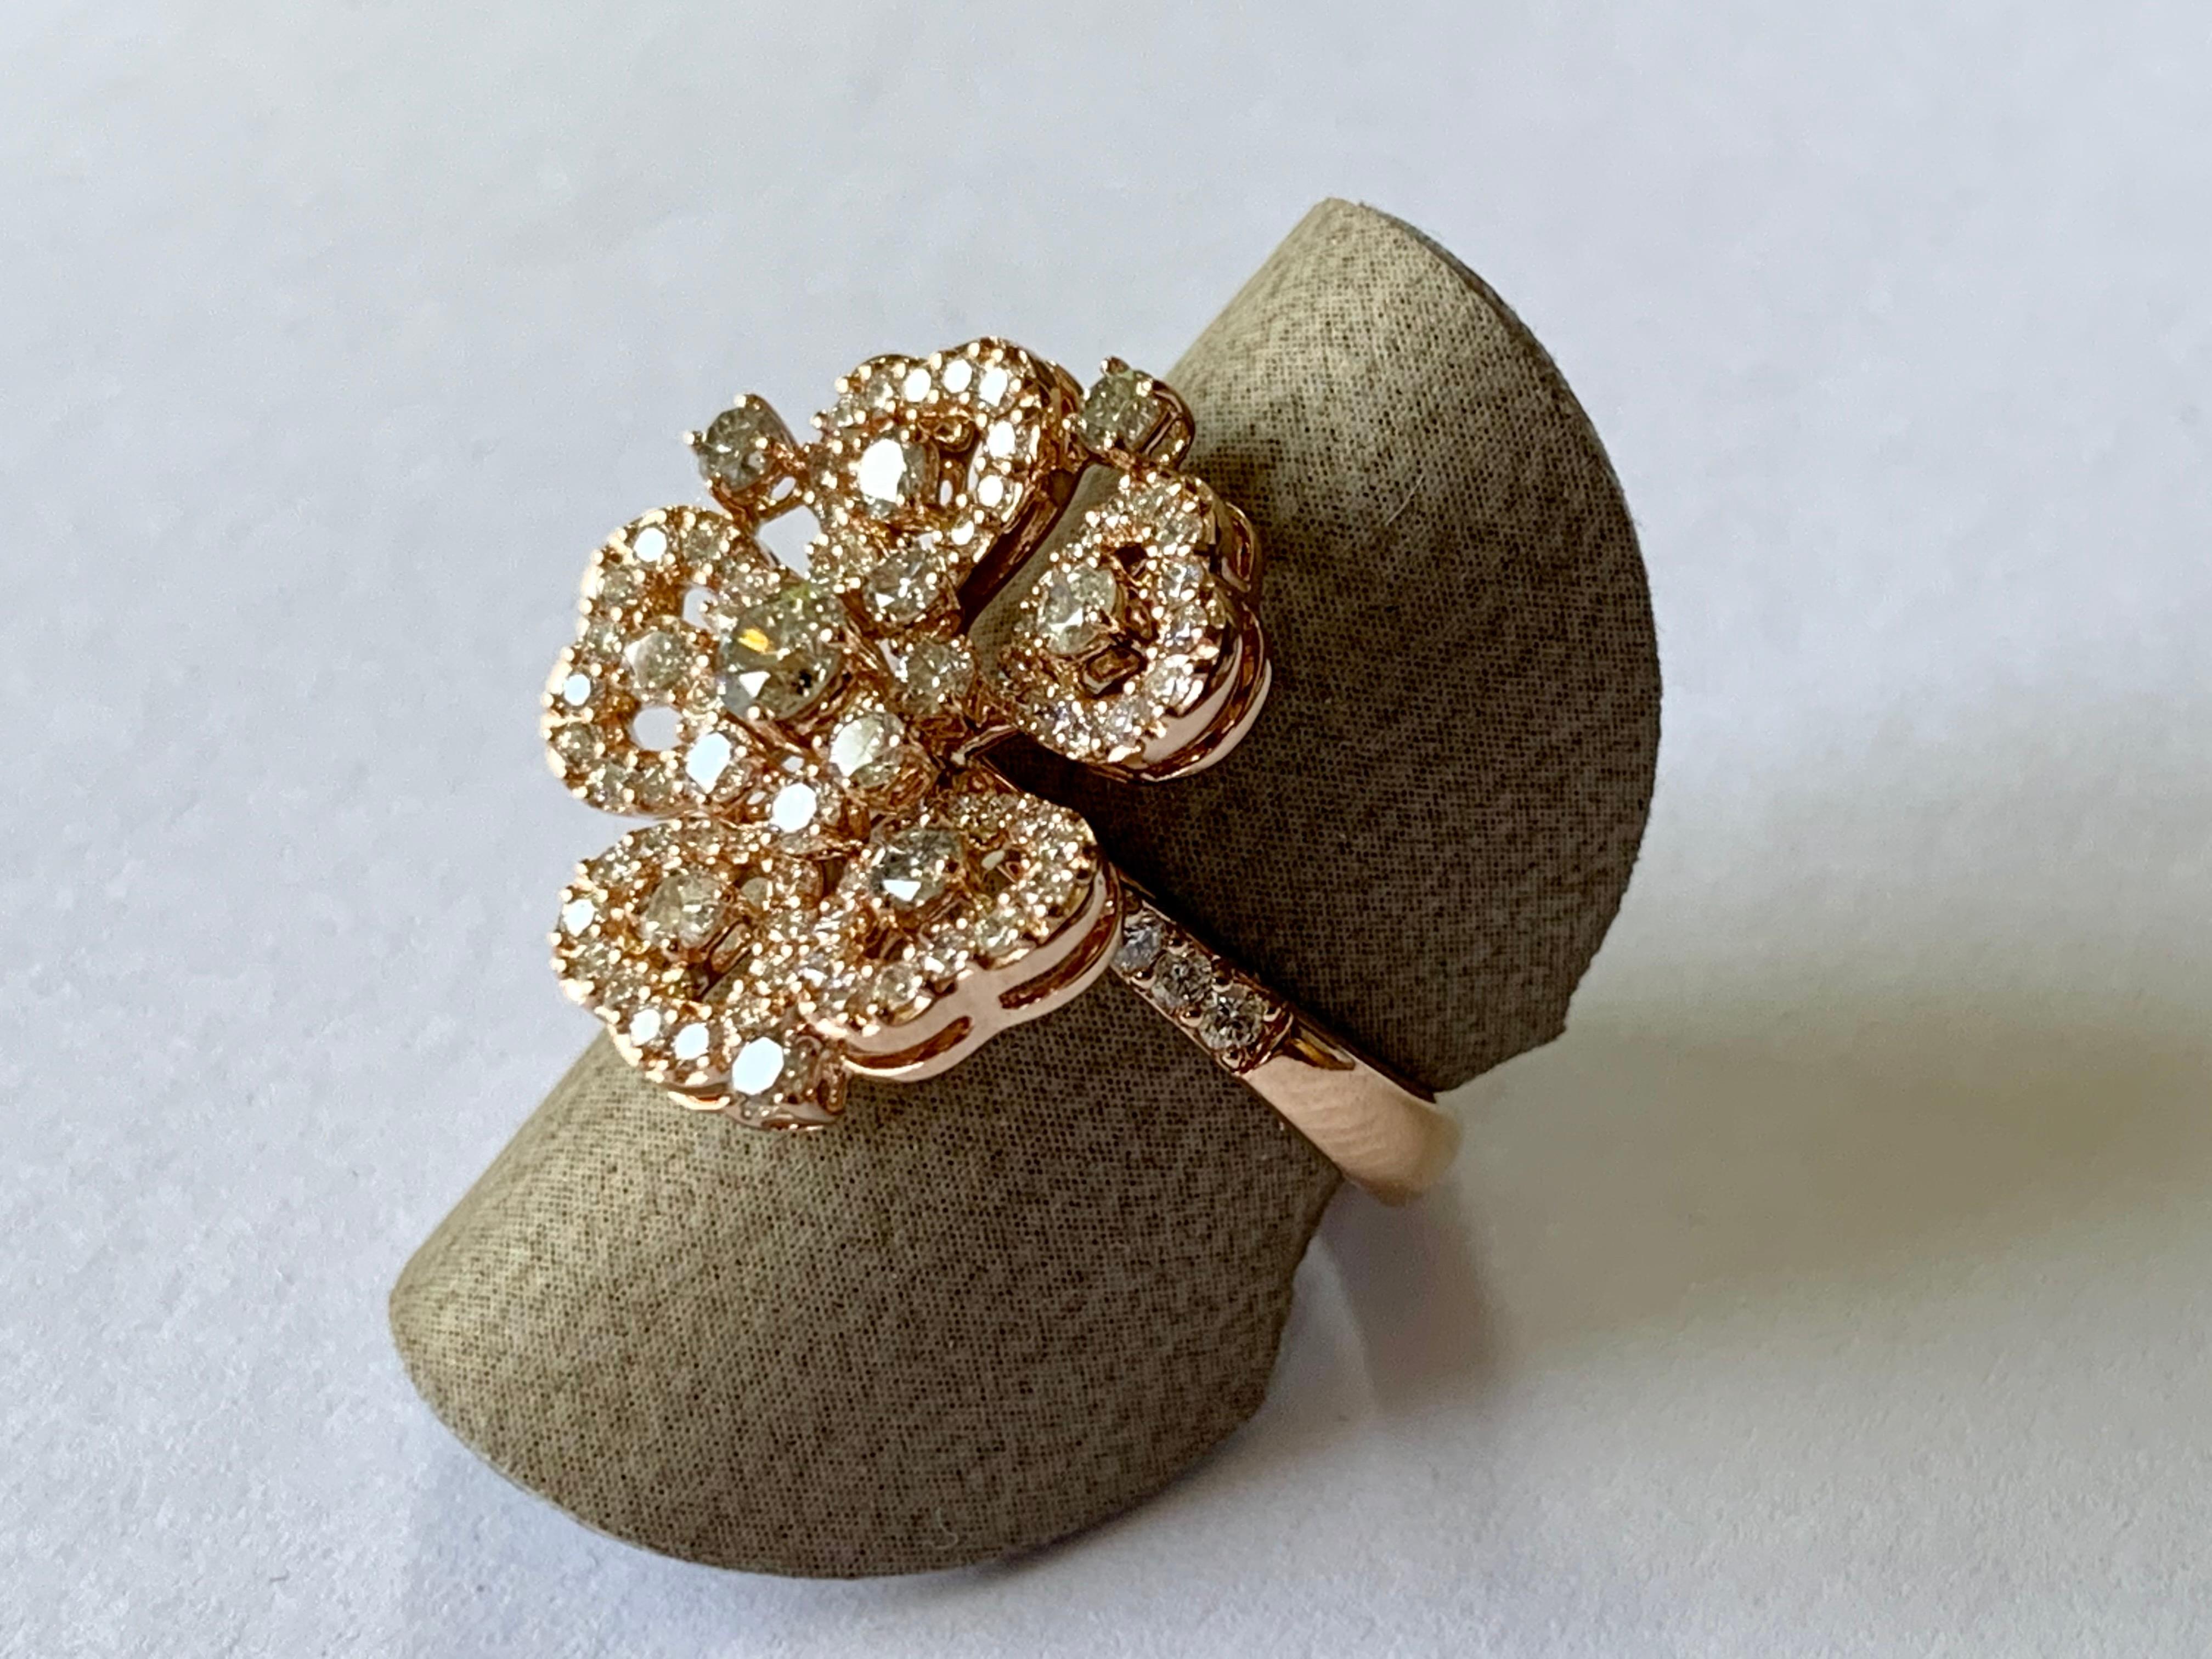 Romantic flower Ring in 18 K rose Gold set with 95 Champagne colored and white brilliant cut Diamonds weighing 1.55 ct. Matching dangle earrings and pendant available.
The ring is currently size 6.5 but can be resized easily. 